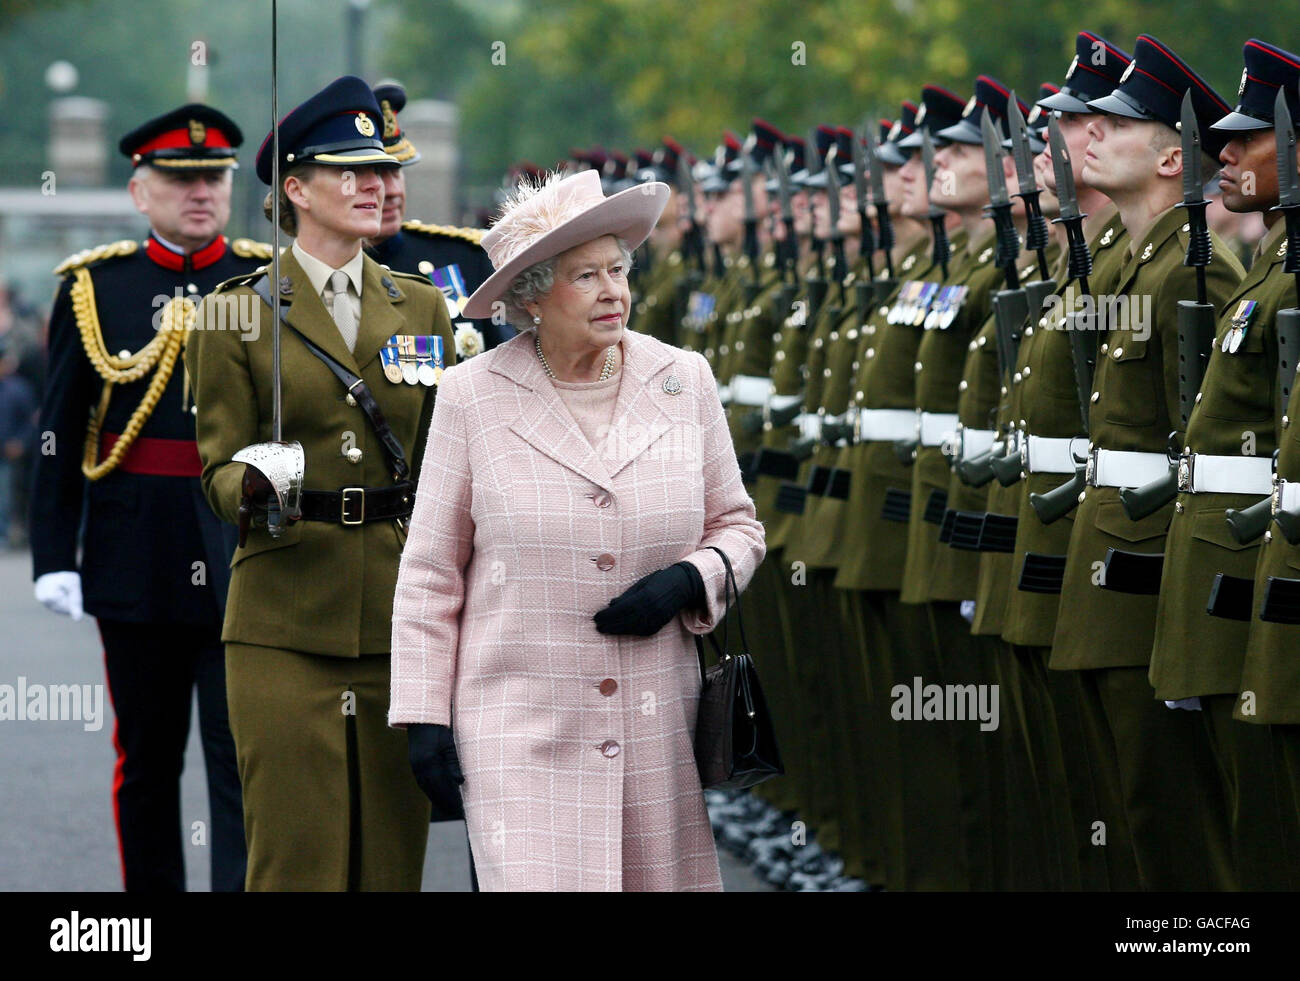 Britain's Queen Elizabeth II inspects the guard of honour during a visit to the Corps of Royal Engineers at Brompton Barracks, Chatham, Kent. Stock Photo